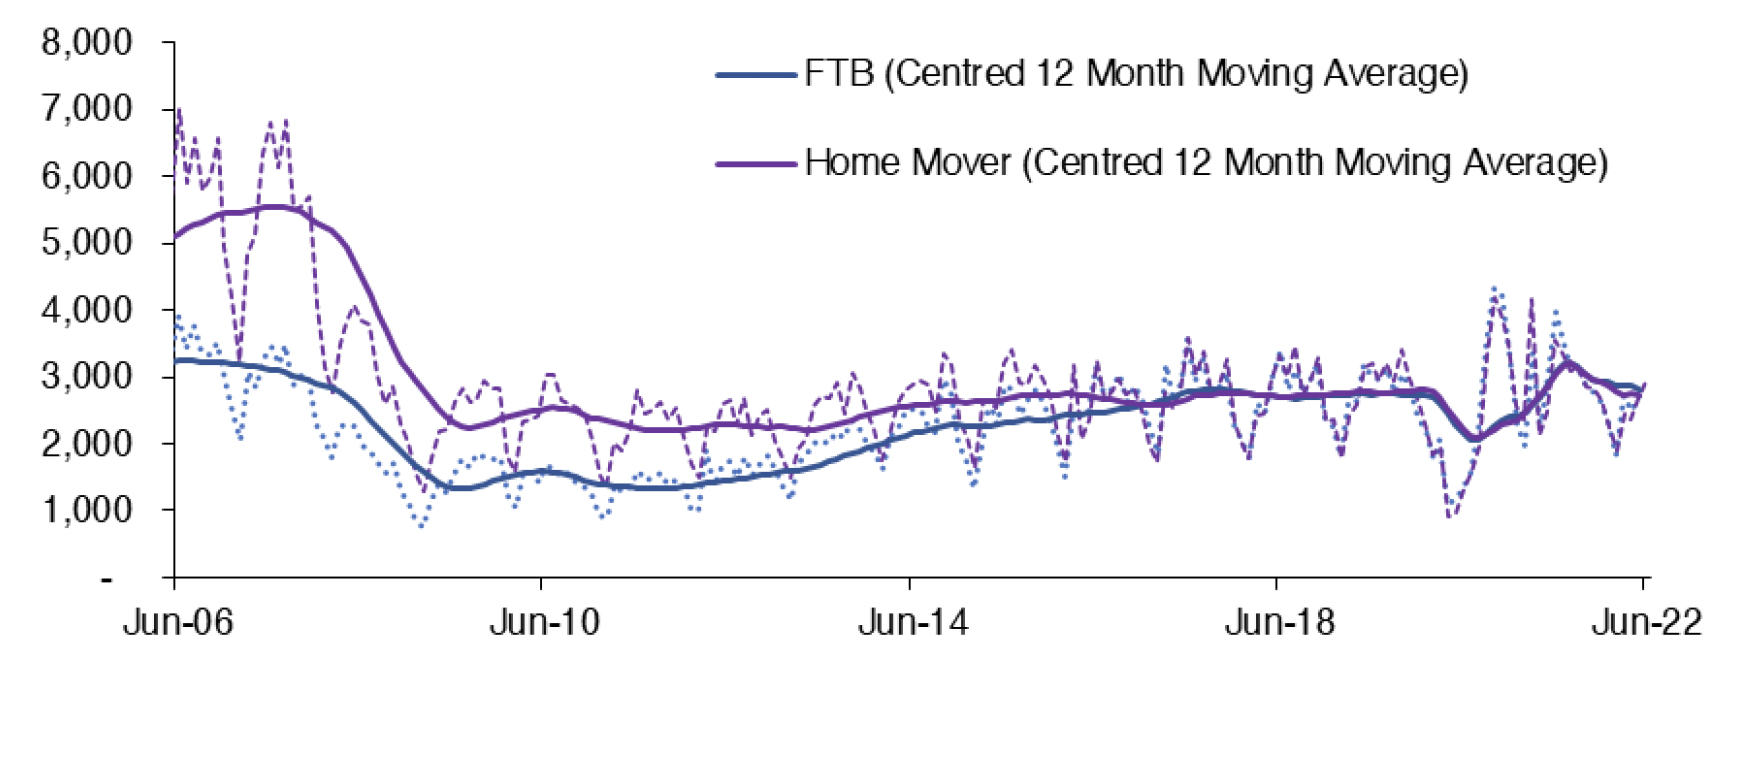 Chart 5.1 outlines how the monthly number of new mortgages advanced to first-time buyers and home movers in Scotland has changed from Q2 2006 to Q2 2022. 